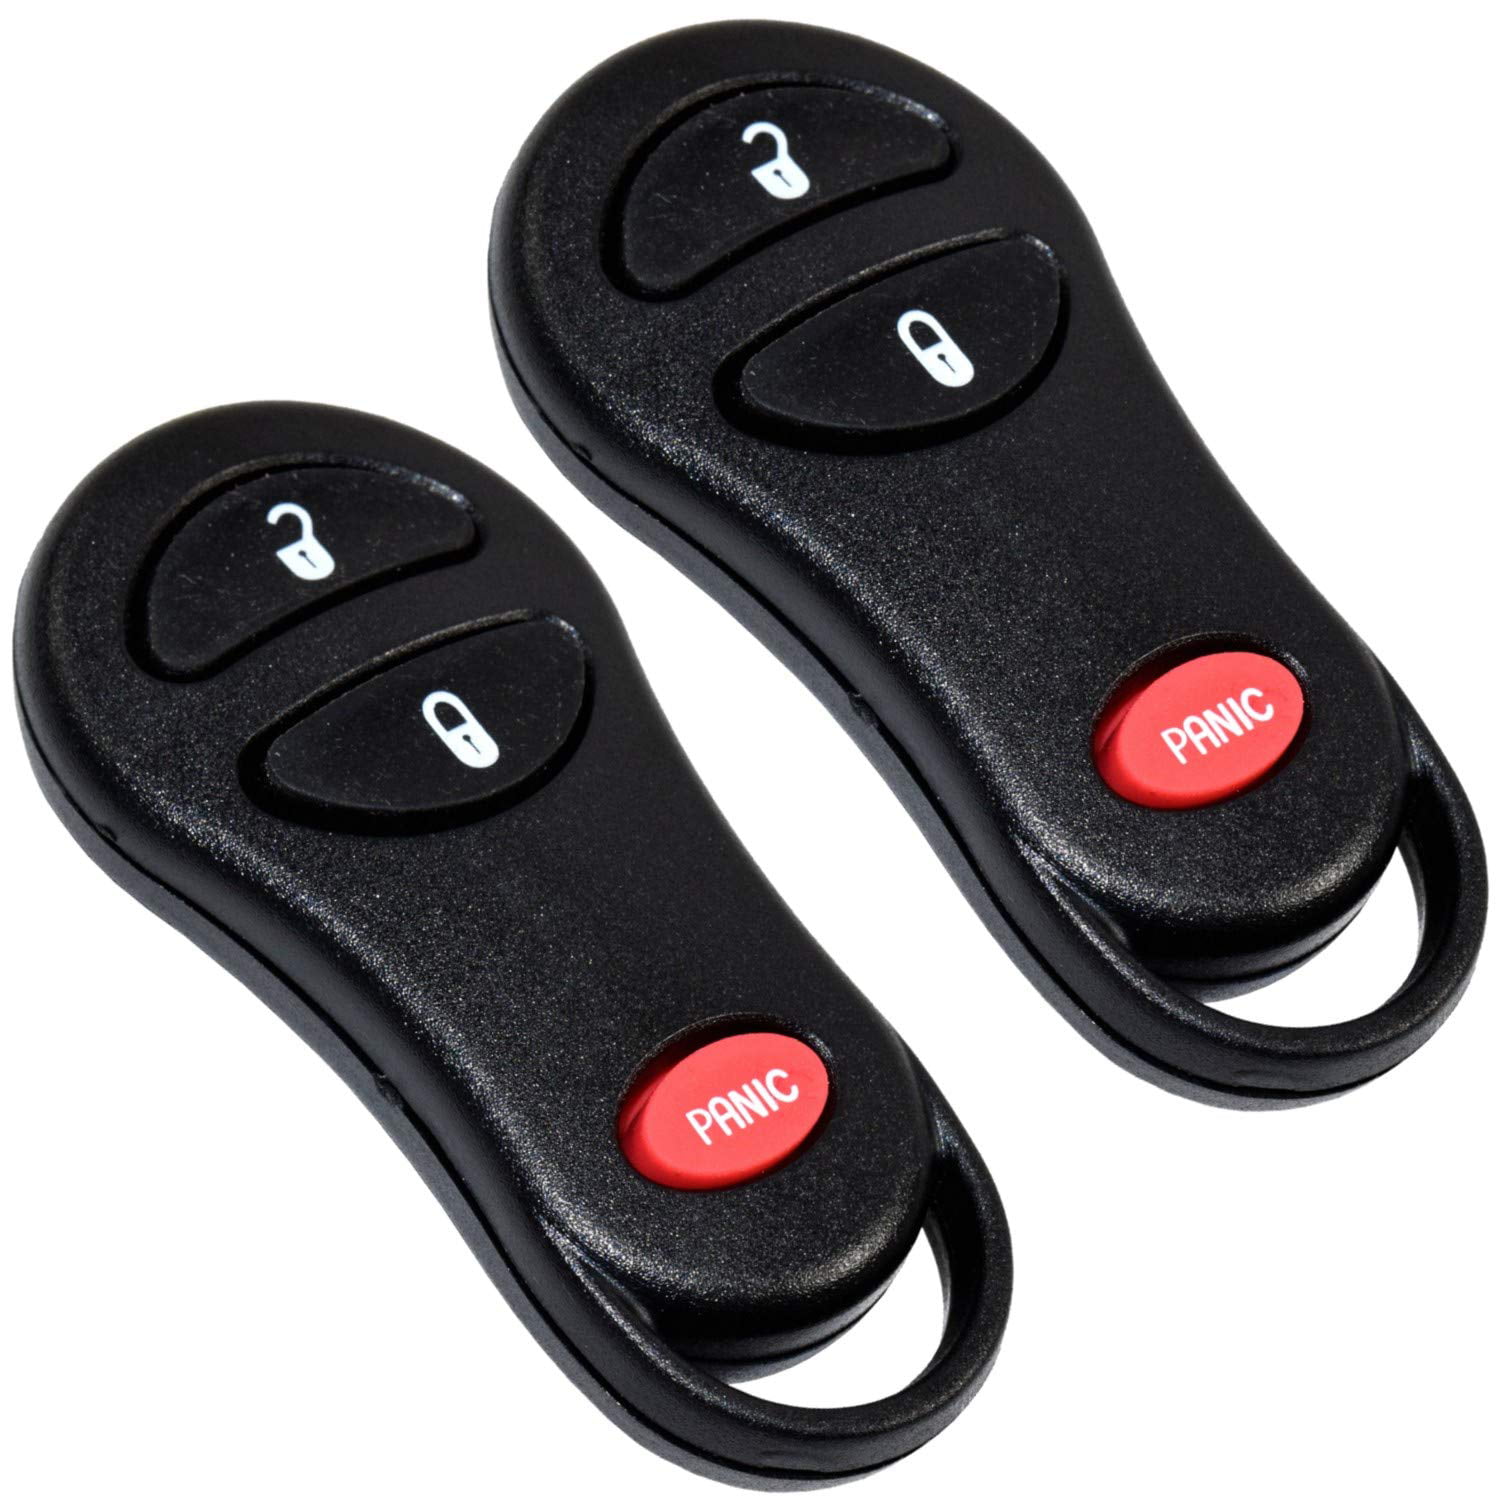 Details about   2 Car Key Fob Entry Remote Case Shell Pad For 1993 1994 1995 Jeep Grand Cherokee 